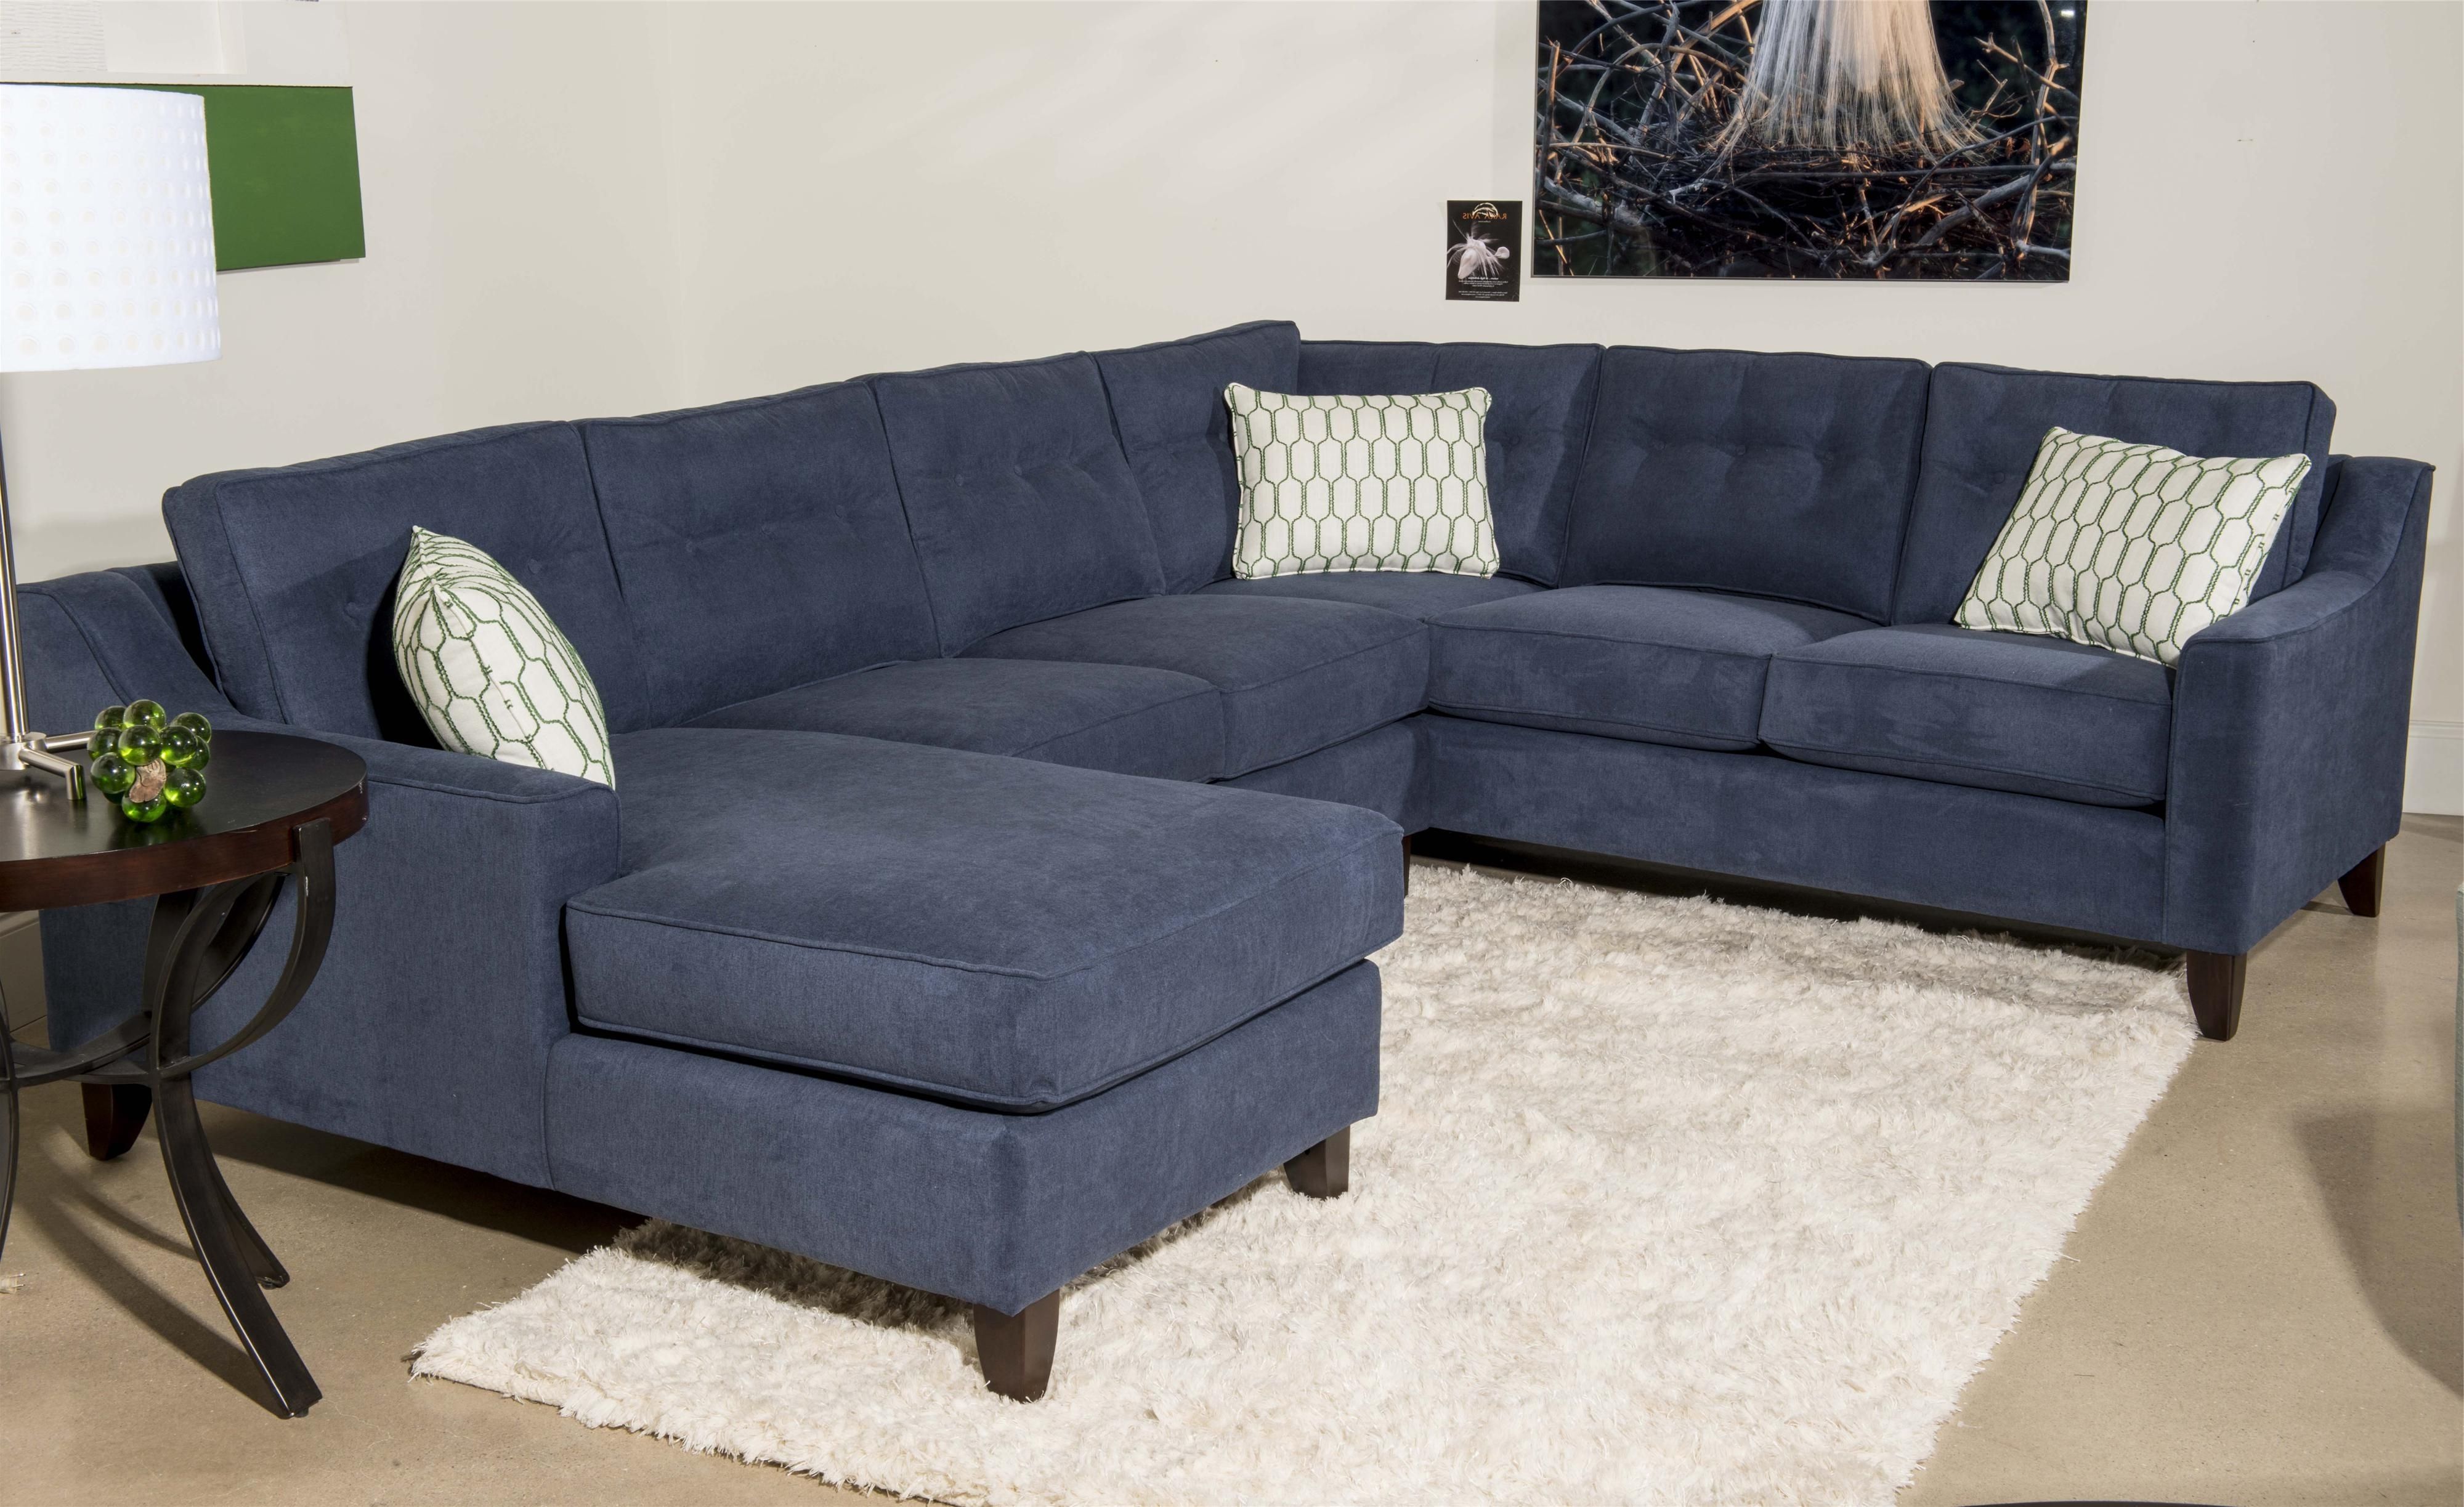 Preferred Chaise Sectional Sofas With Regard To Sectional Sofa Design: 3 Pieces Wonderful Sofa With Chaise 3 Piece (View 13 of 15)